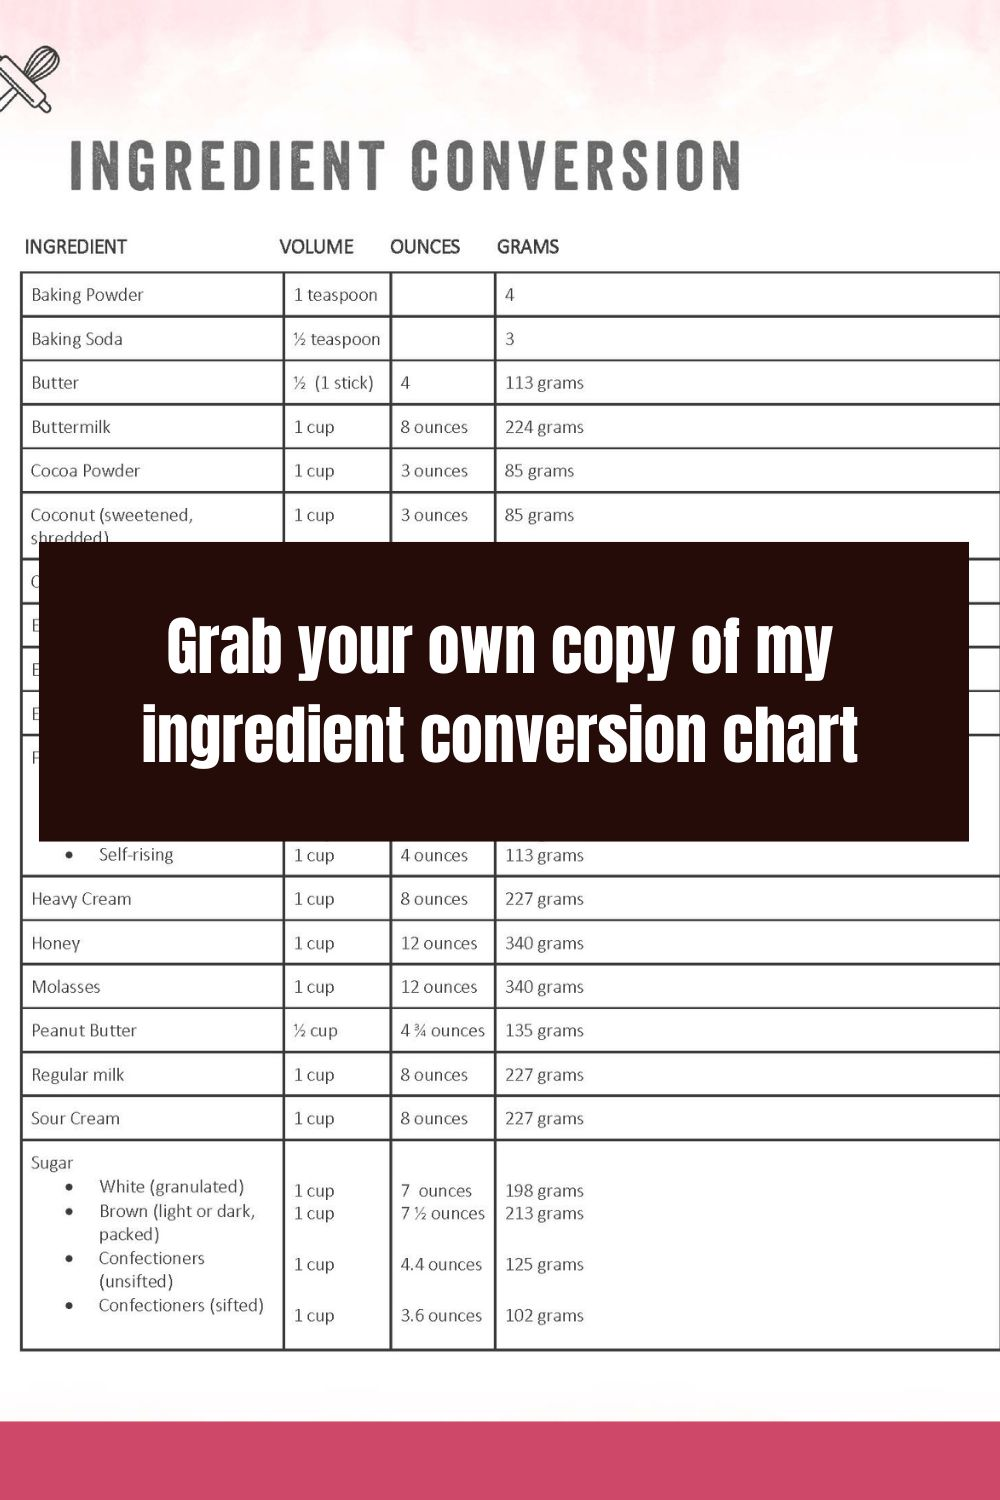 Grams to Cups Guide For Baking (With Conversion Chart!)